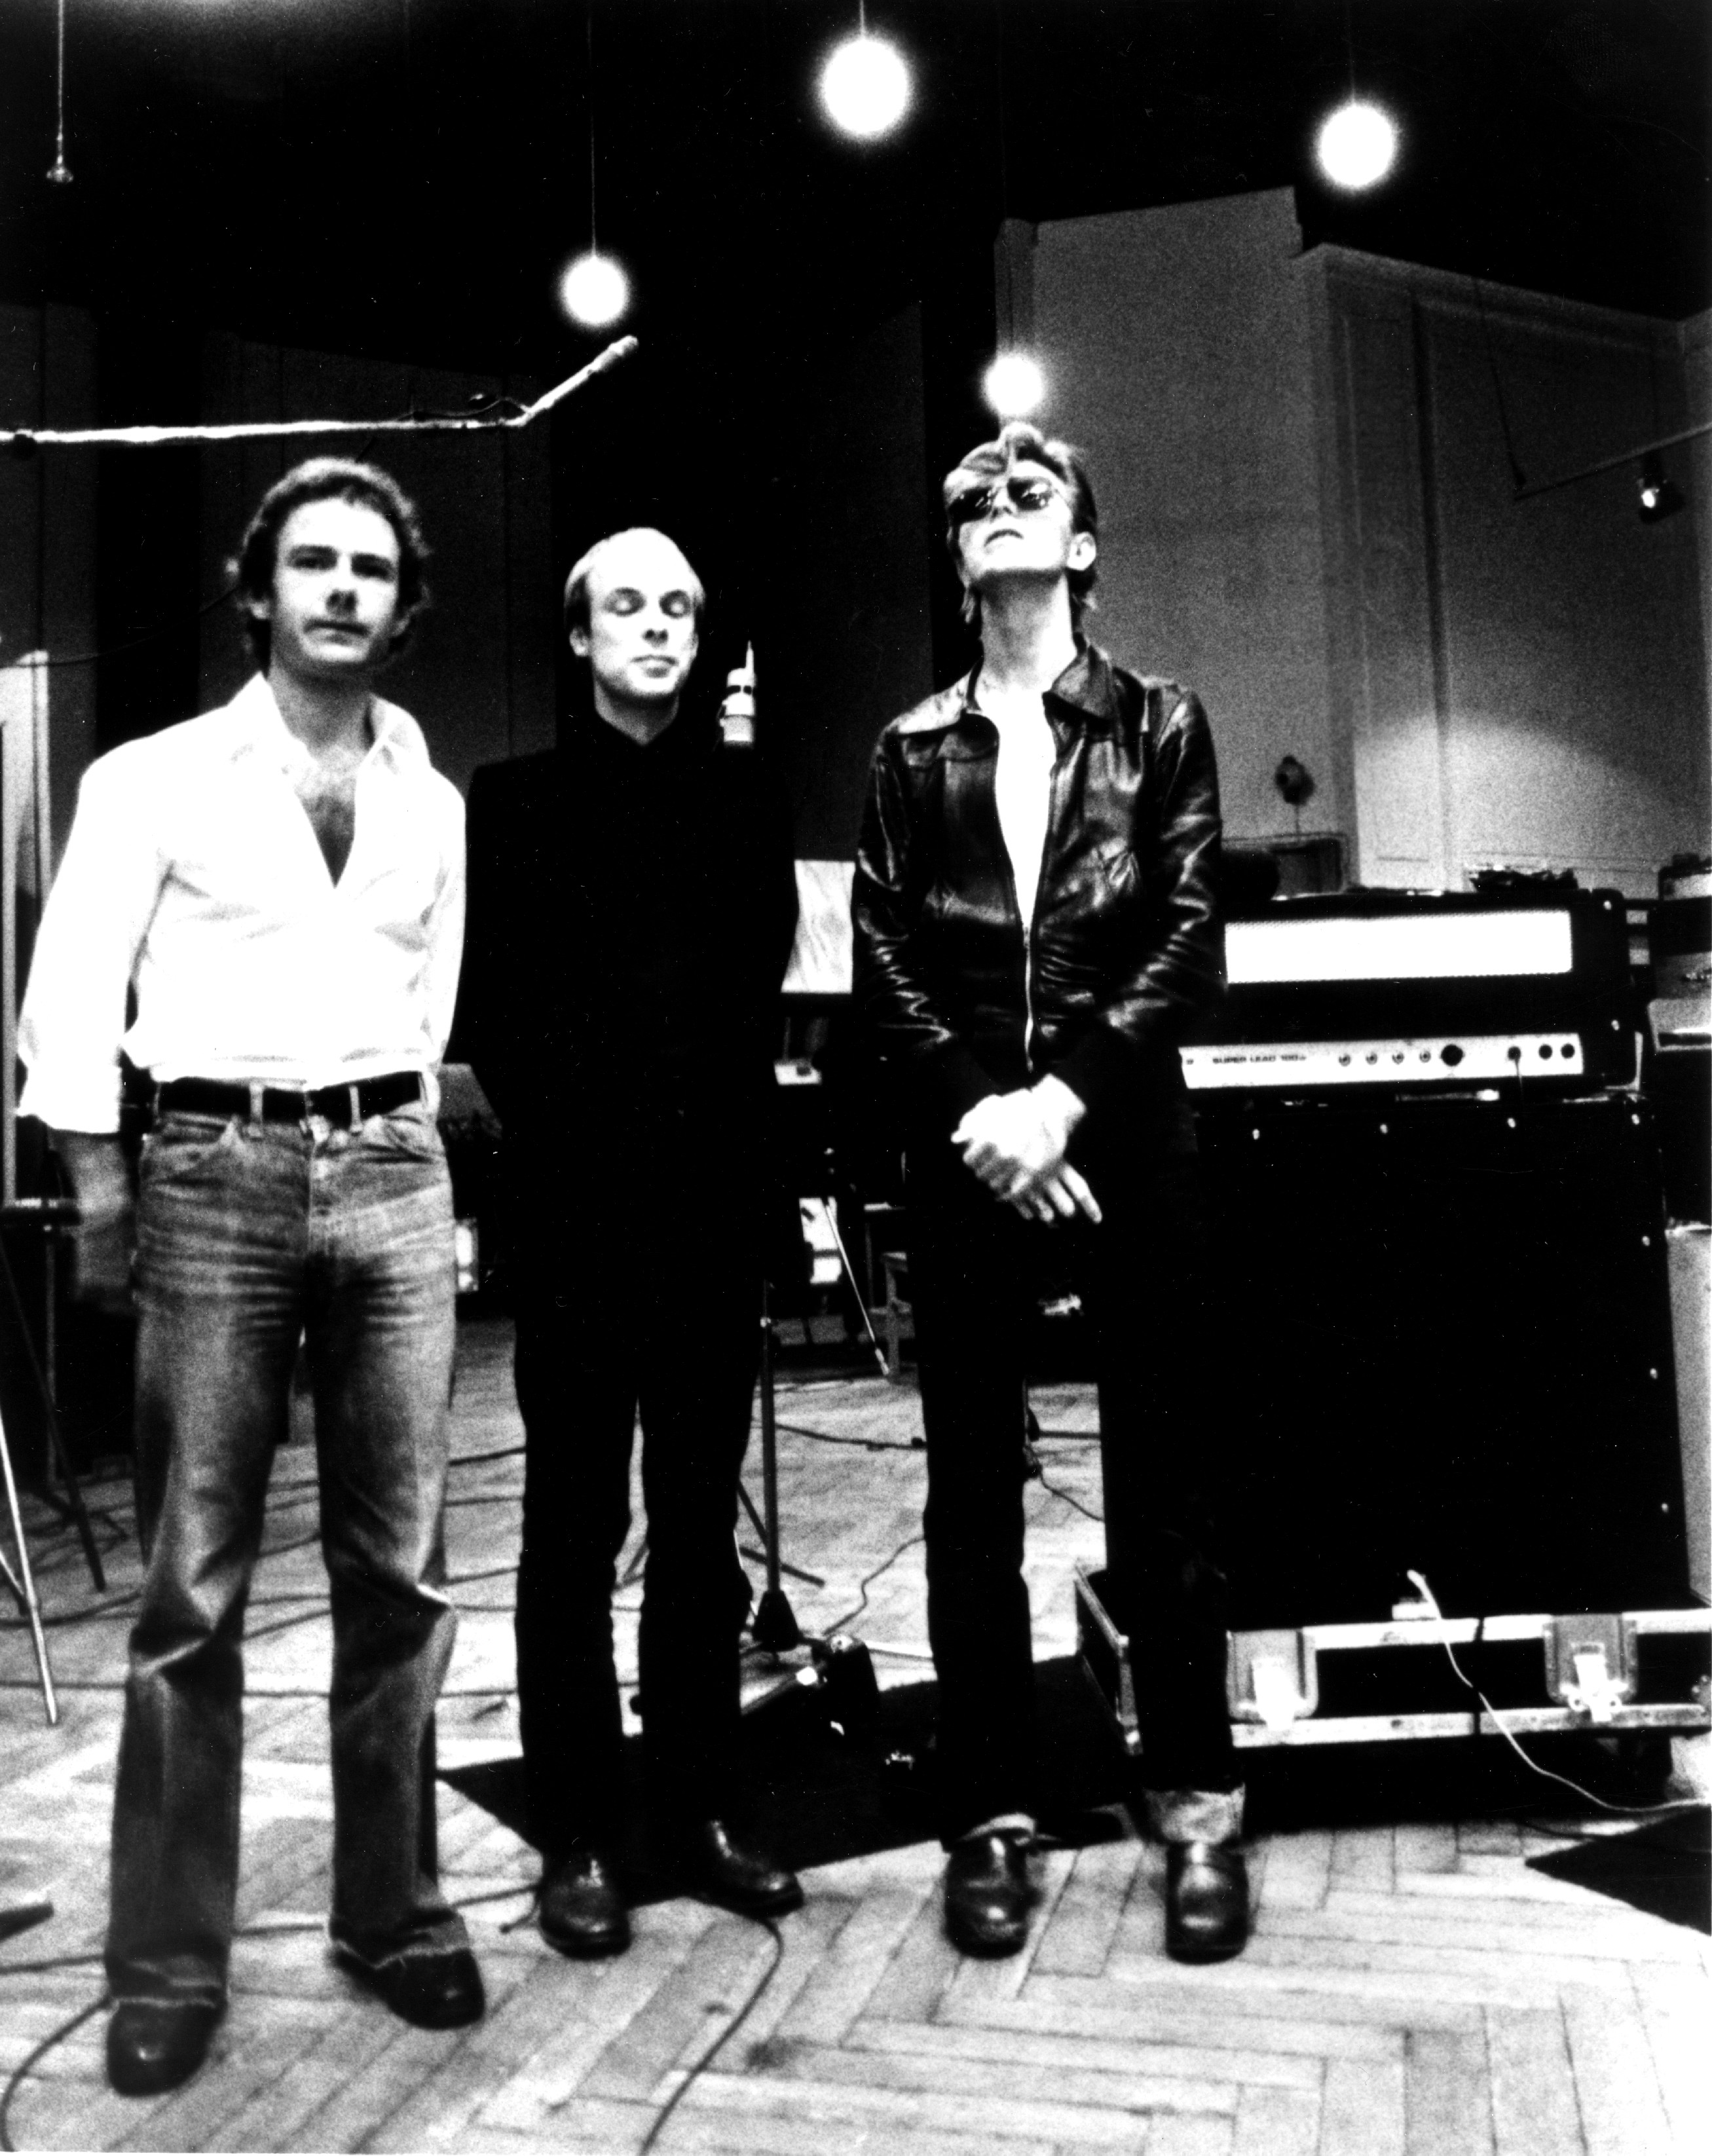 BERLIN - 1977:  Robert Fripp, Brian Eno and David Bowie pose for a portrait in the studio where they are recorded "Heroes" in 1977 in Berlin, Germany. Photo by Michael Ochs Archives/Getty Images (Foto: Reprodução/ James Mollison/ Jacopo Salvi/ Saint Heron)